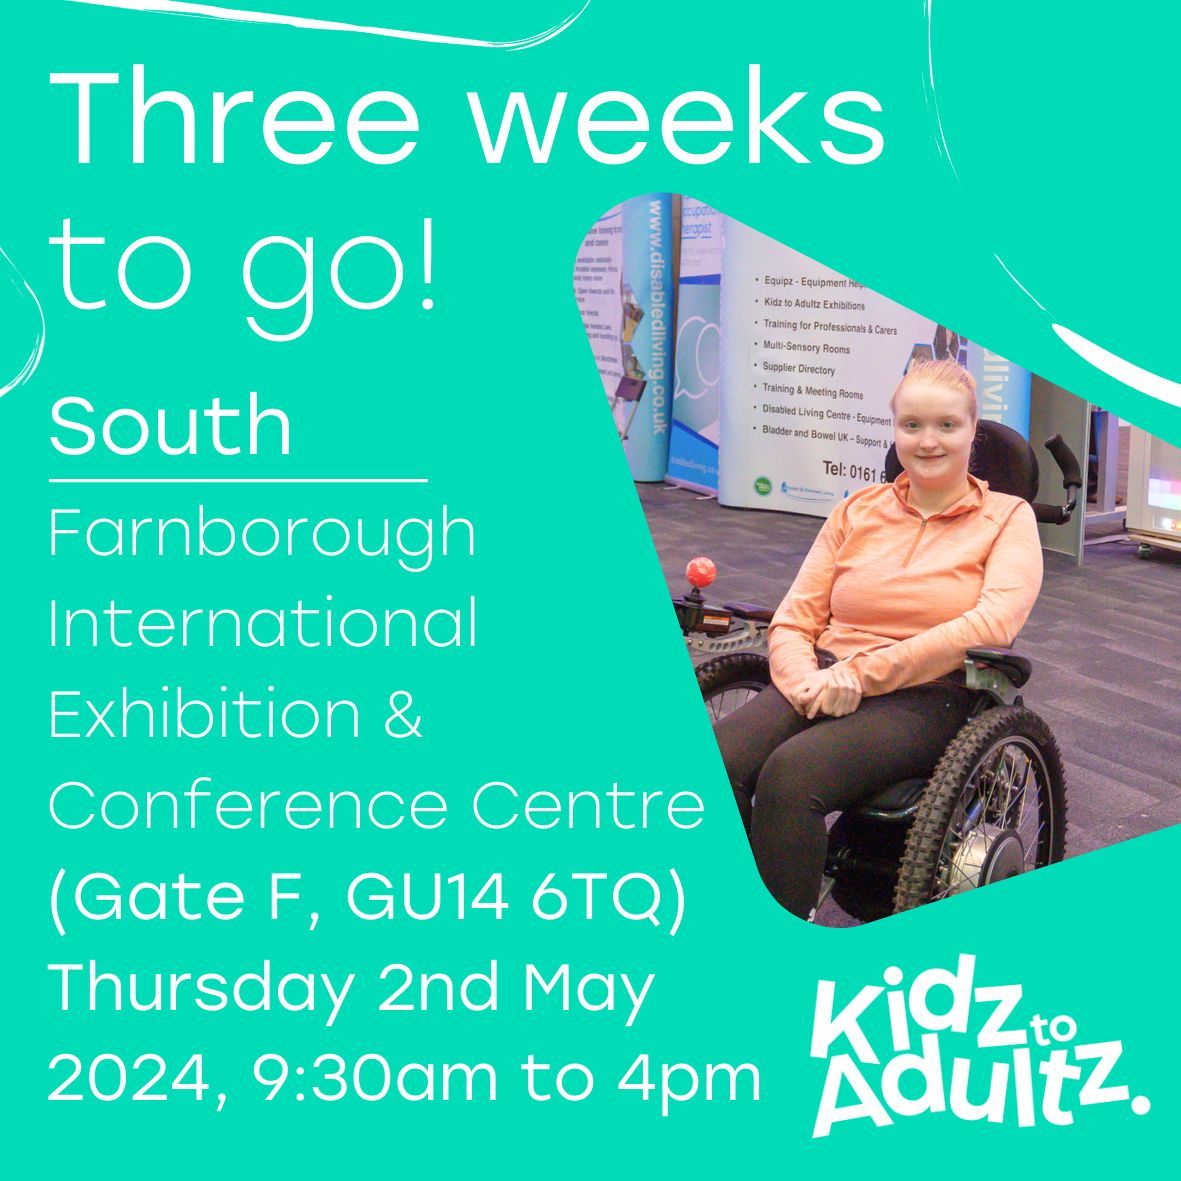 Only three weeks to go until @kidztoadultz exhibitions South, and we can't wait! Who's coming to see us?

#kidztoadultz #disability #exhibition #KidzToAdultz #KidzToAdultzSouth #DisabilityAwareness #DisabilityInclusion #DisabilitySupport